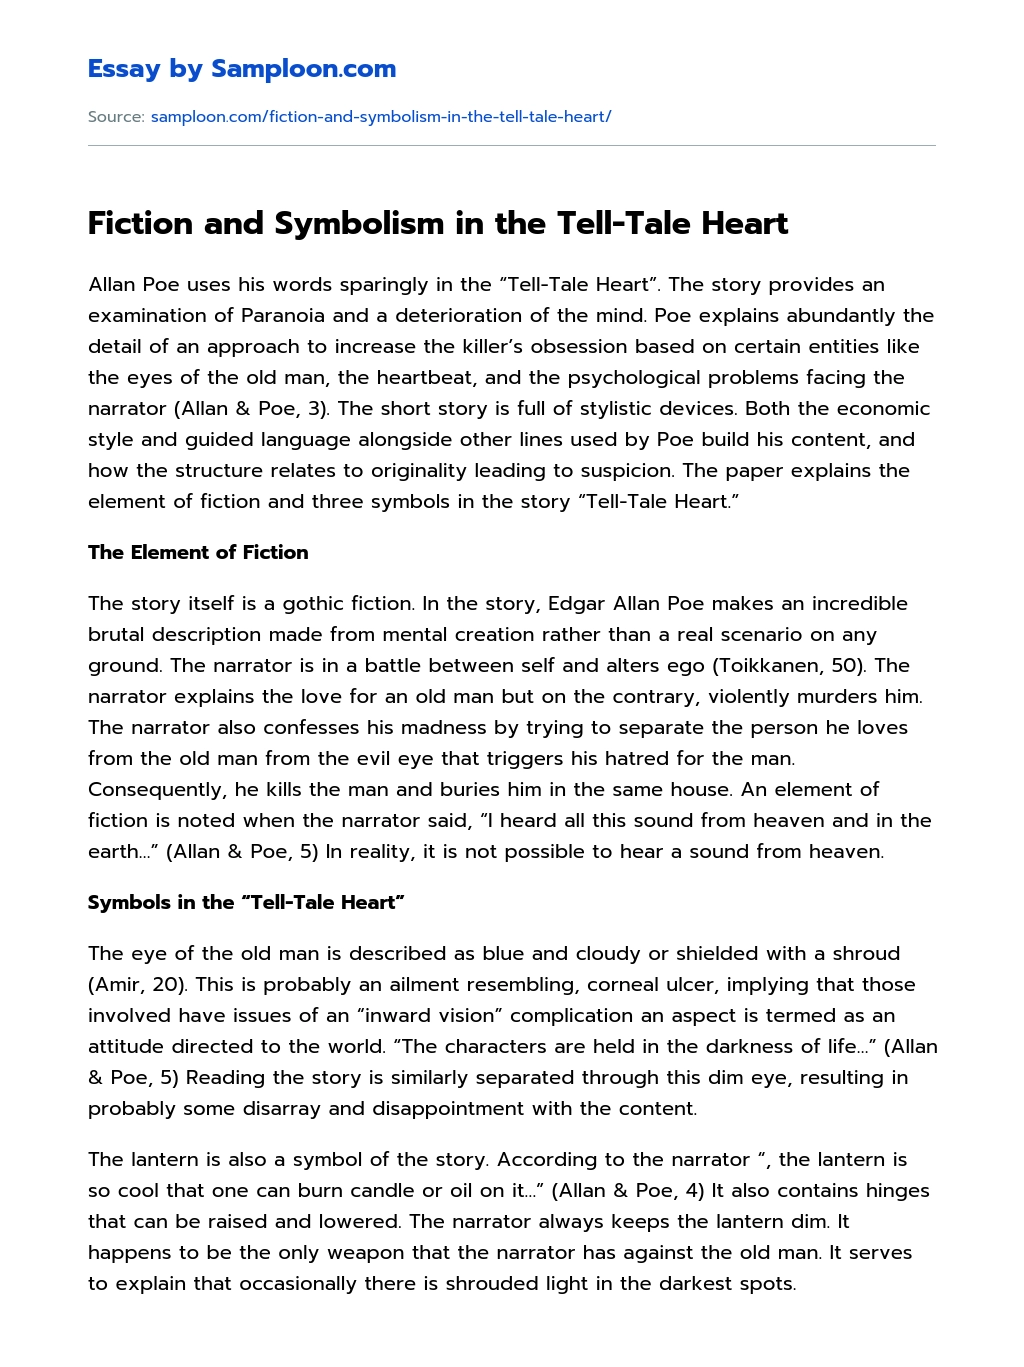 Fiction and Symbolism in the Tell-Tale Heart essay